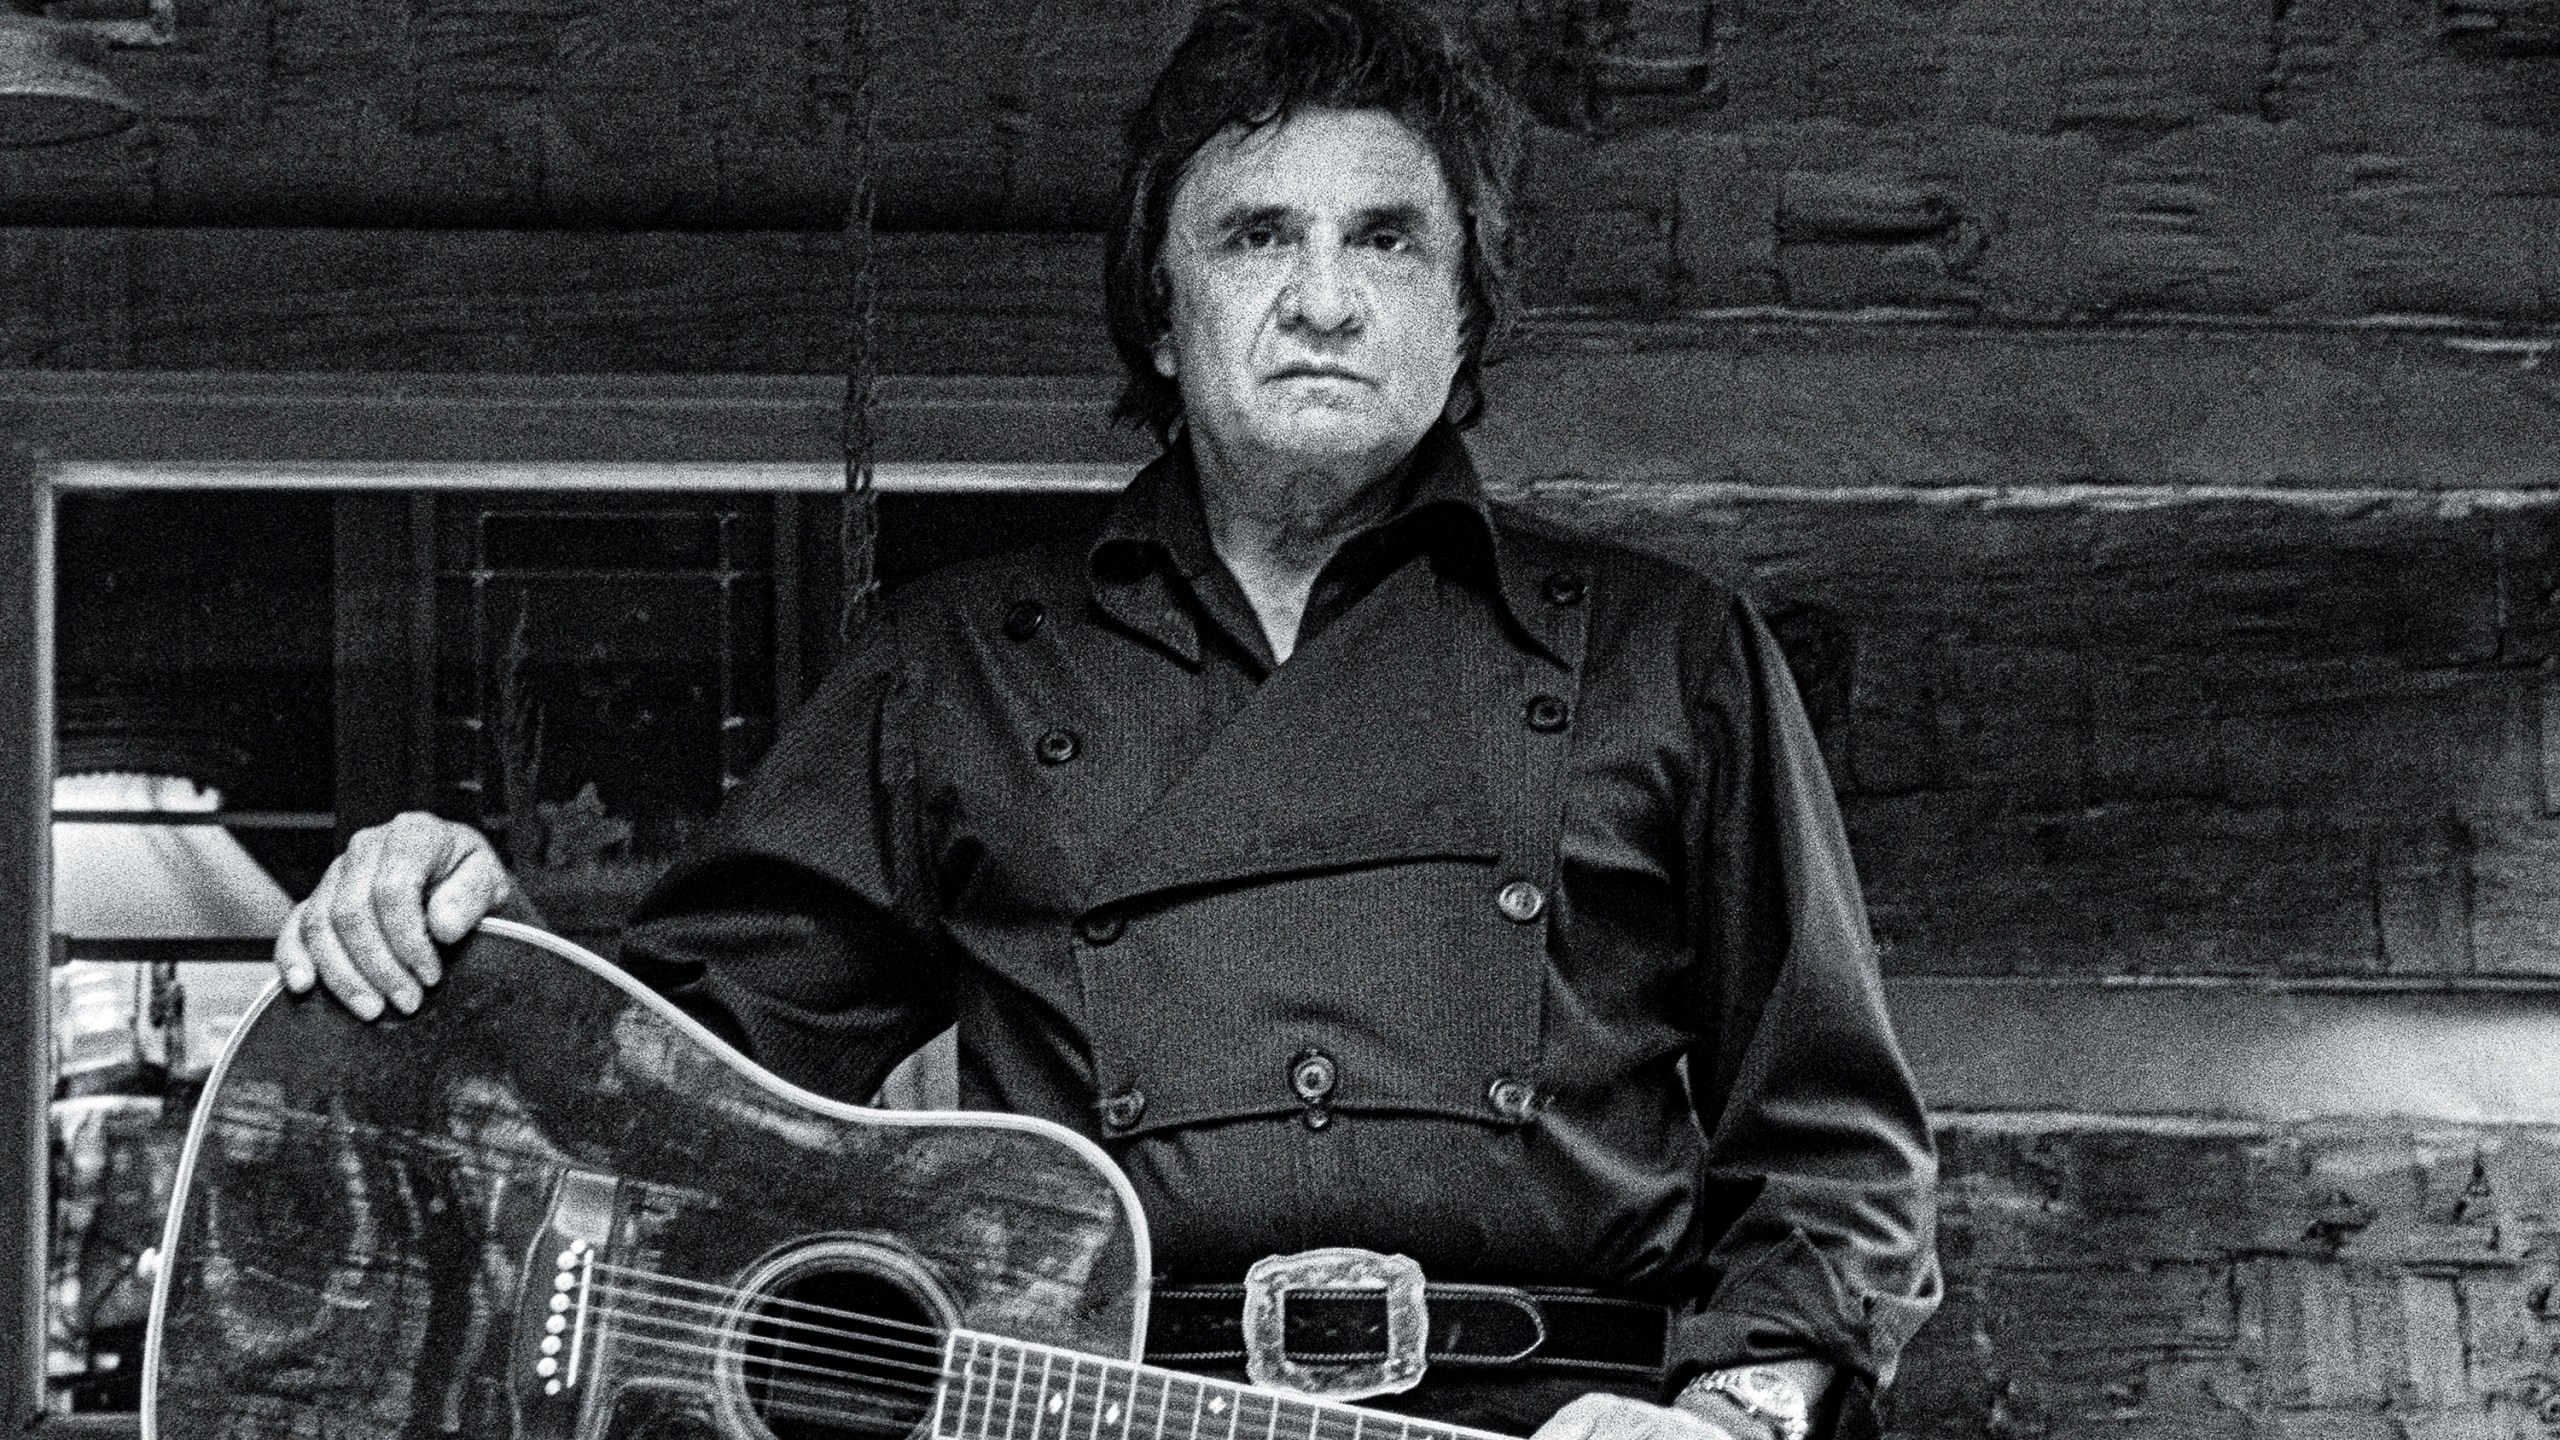 This cover image released by Mercury Nashville/Ume shows "Songwriter" by Johnny Cash. (Mercury Nashville/Ume via AP)